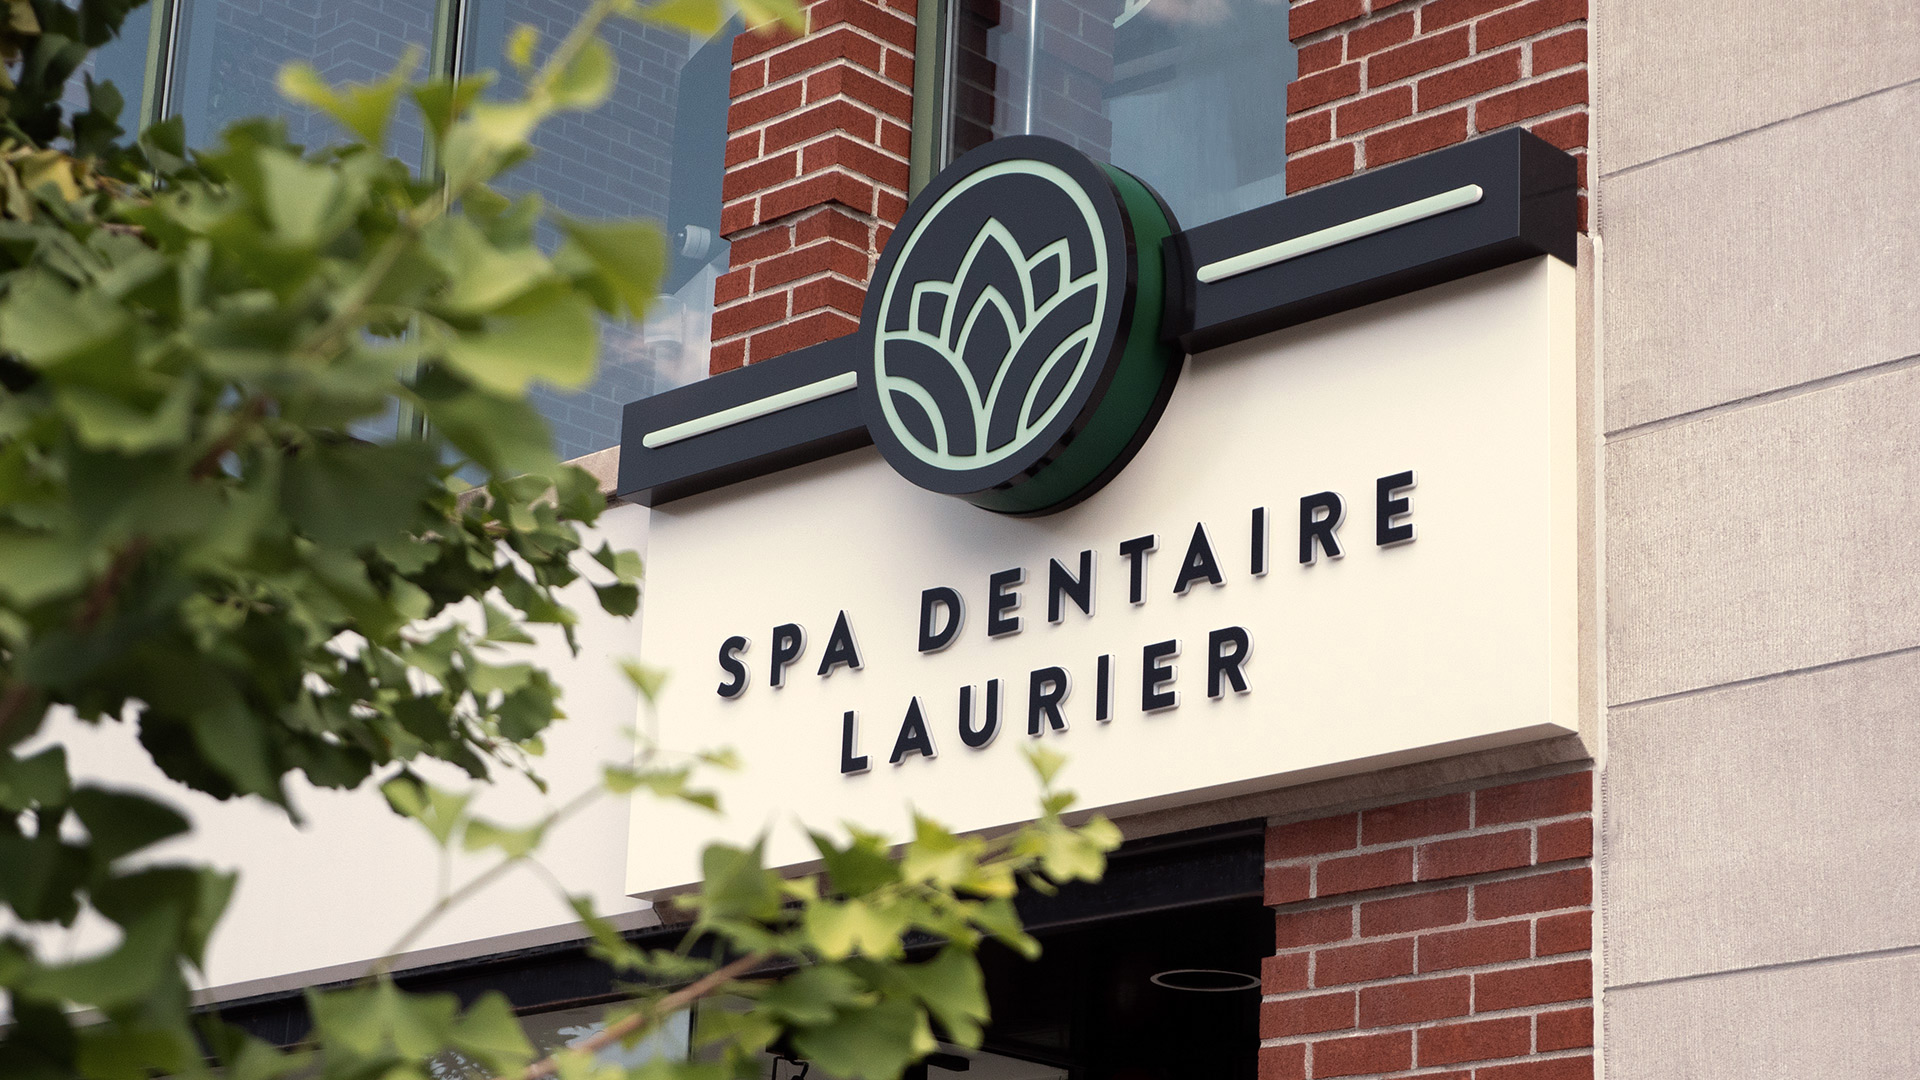 Spa Dentaire Laurier